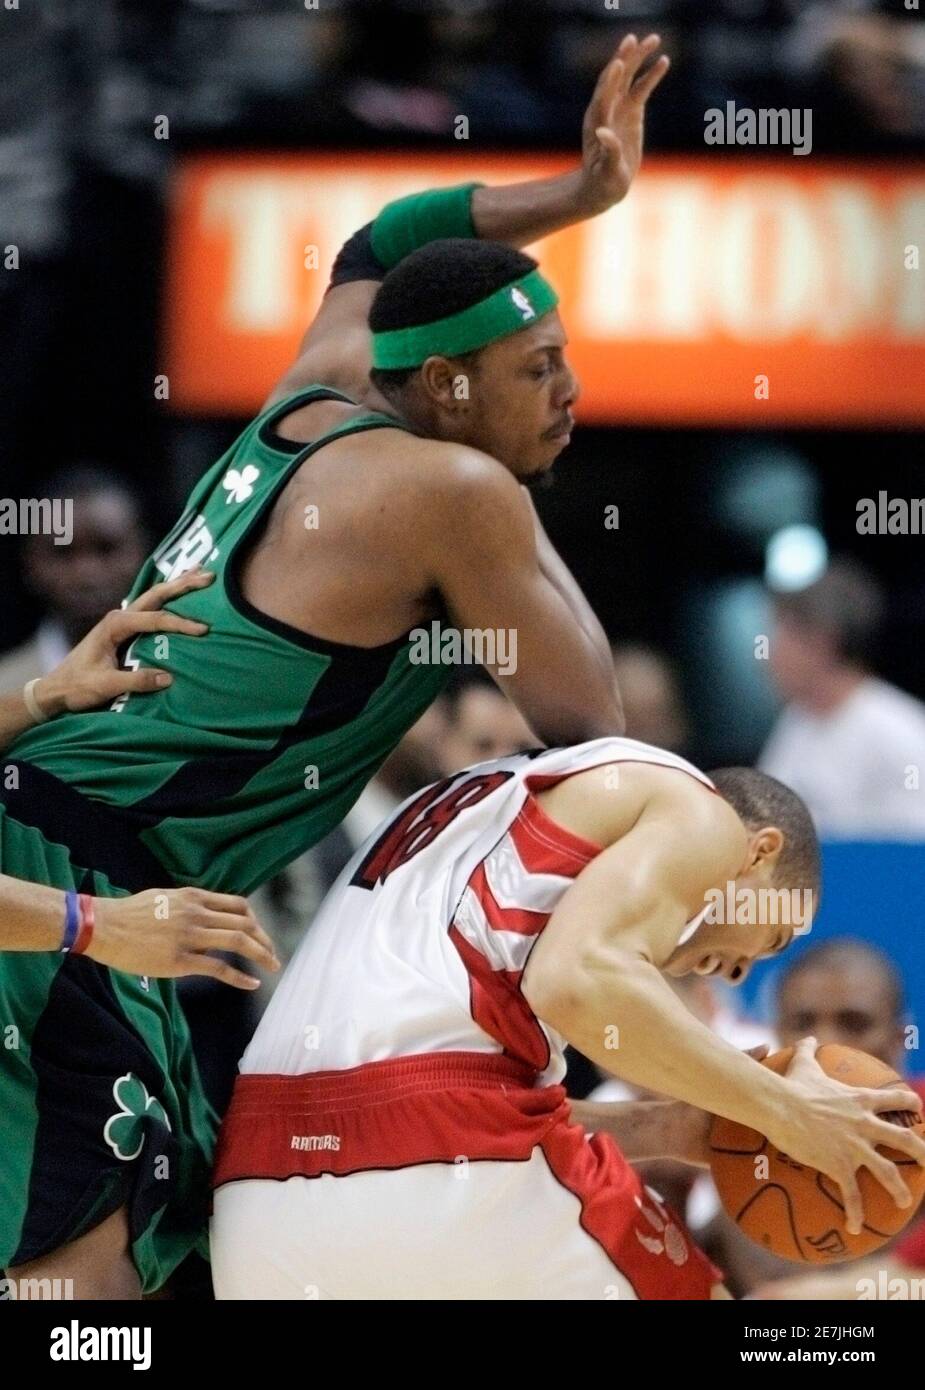 Toronto Raptors Anthony Parker (R) is fouled by Boston Celtics Paul Pierce during the first half of their NBA basketball game in Toronto, December 1, 2006.    REUTERS/Mike Cassese   (CANADA) Stock Photo